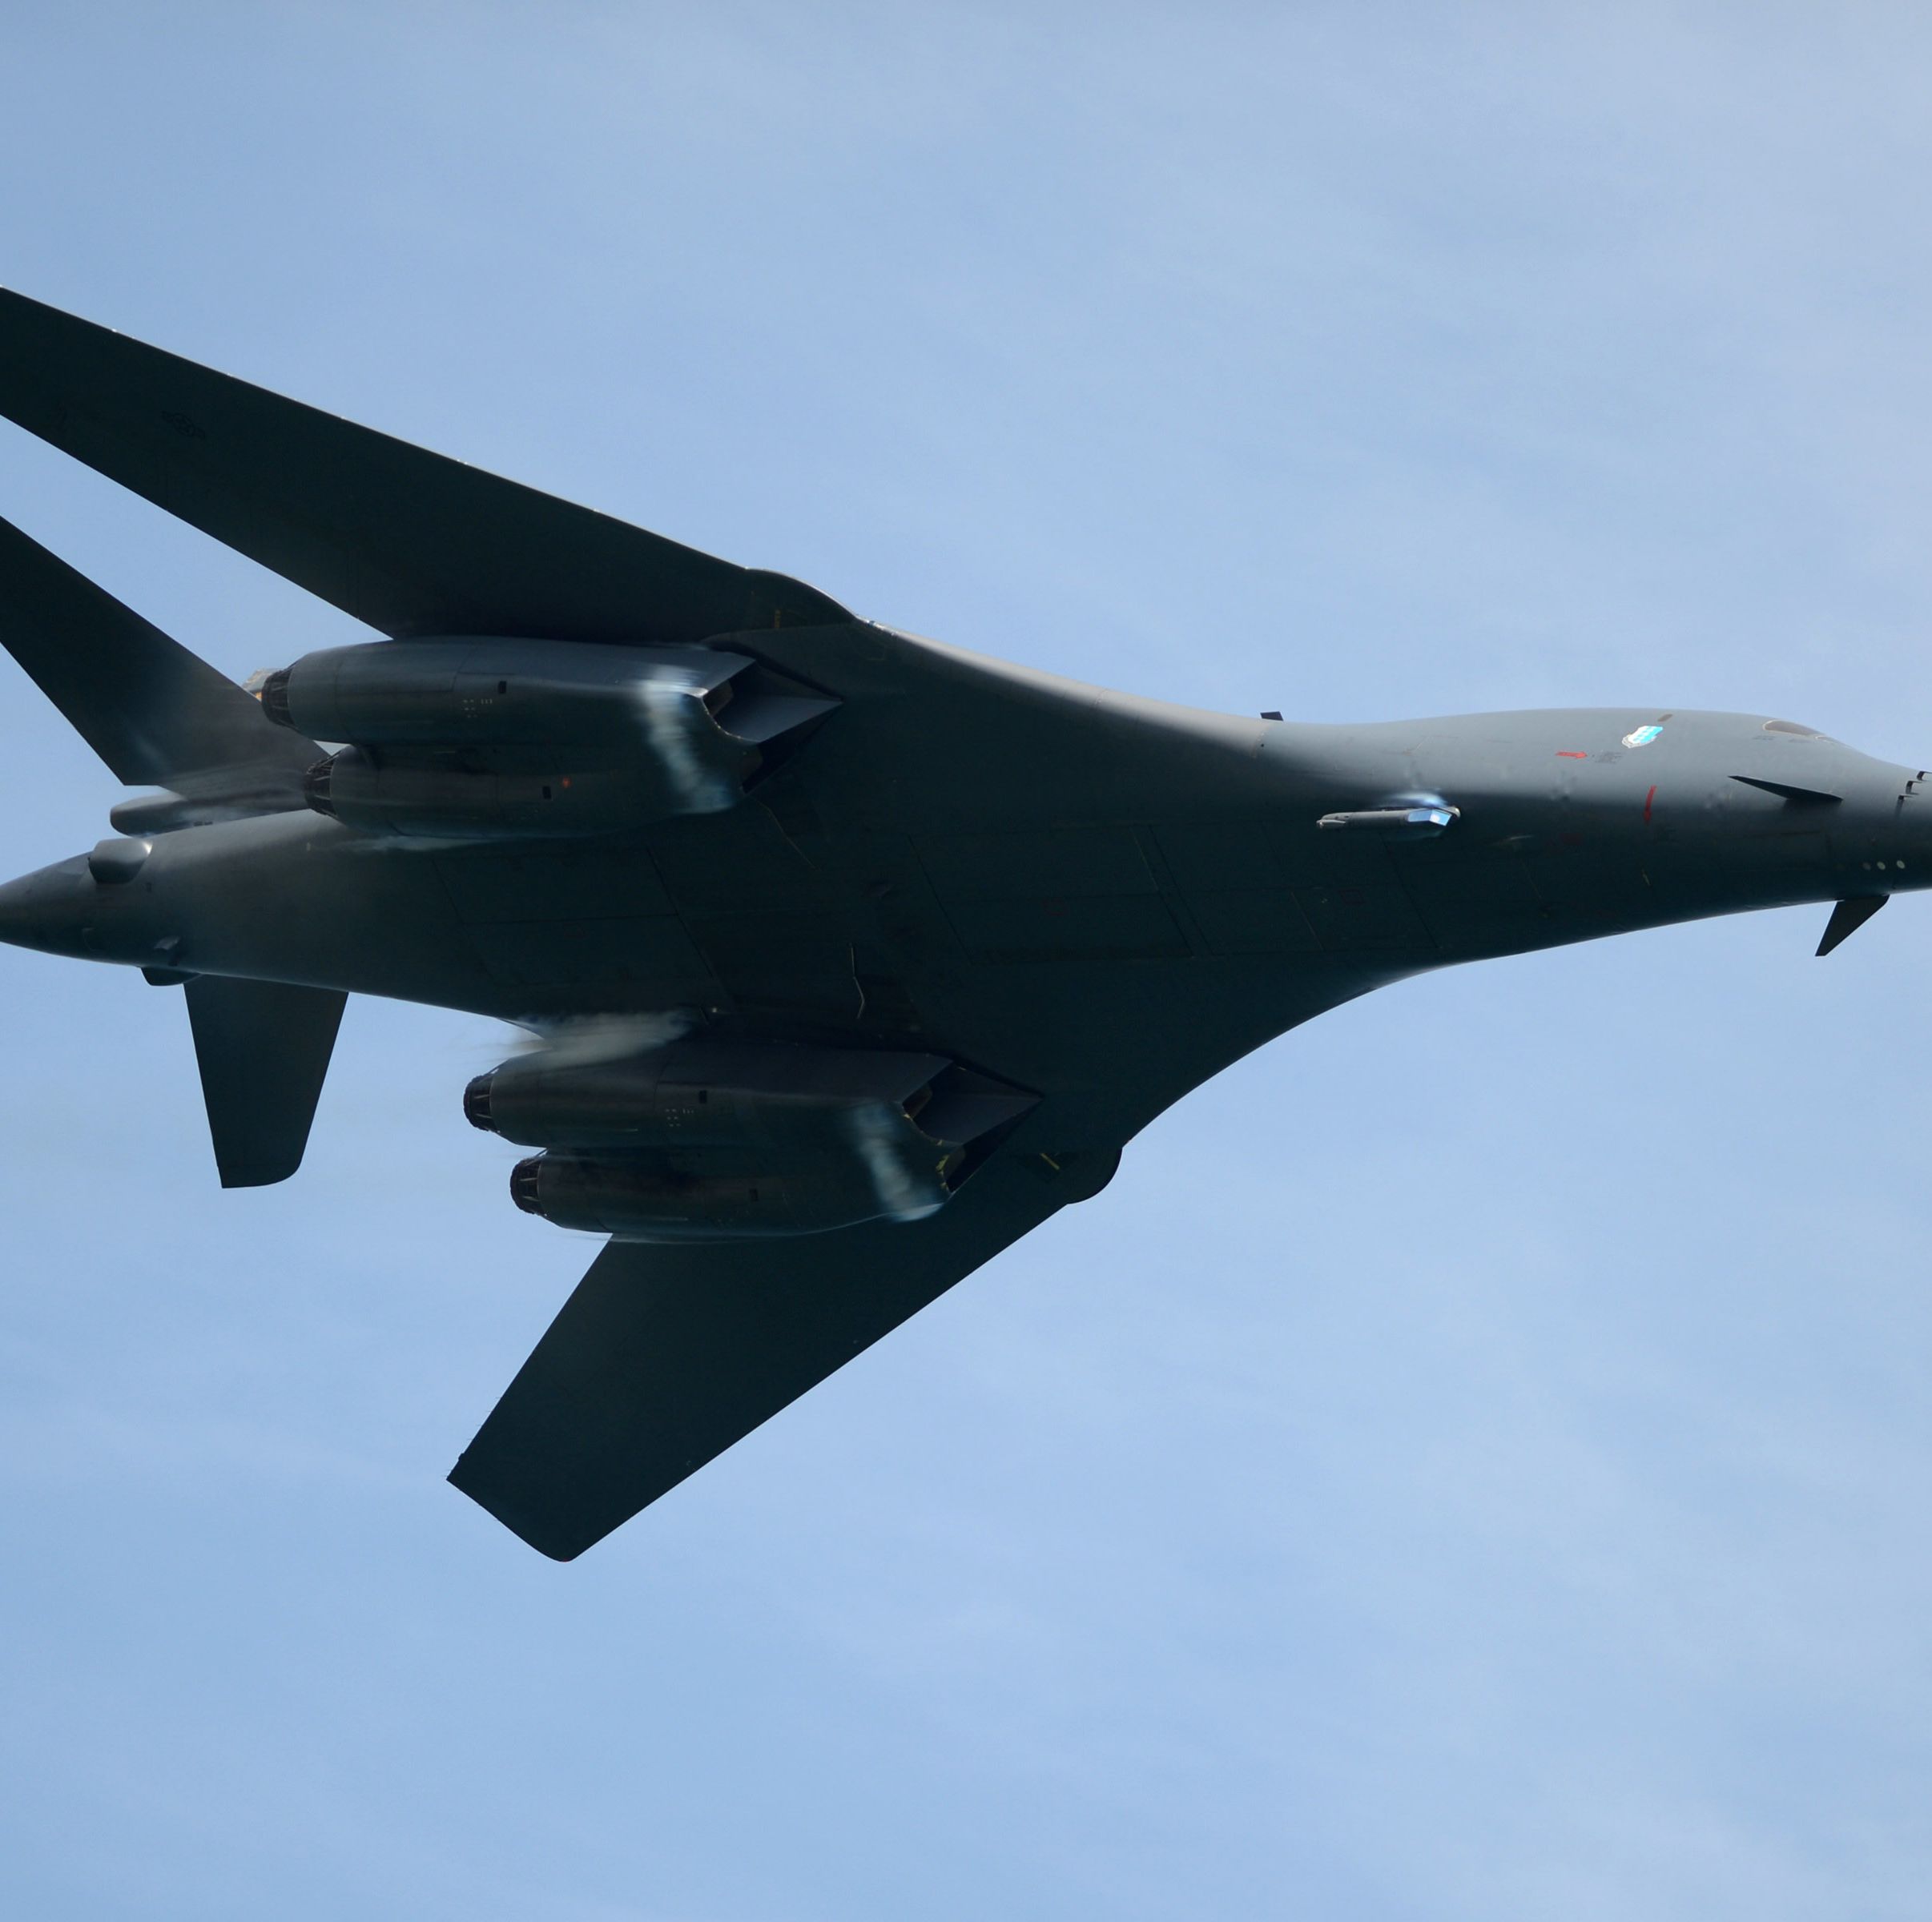 The Most Deadly Version of the B-1 Bomber Yet